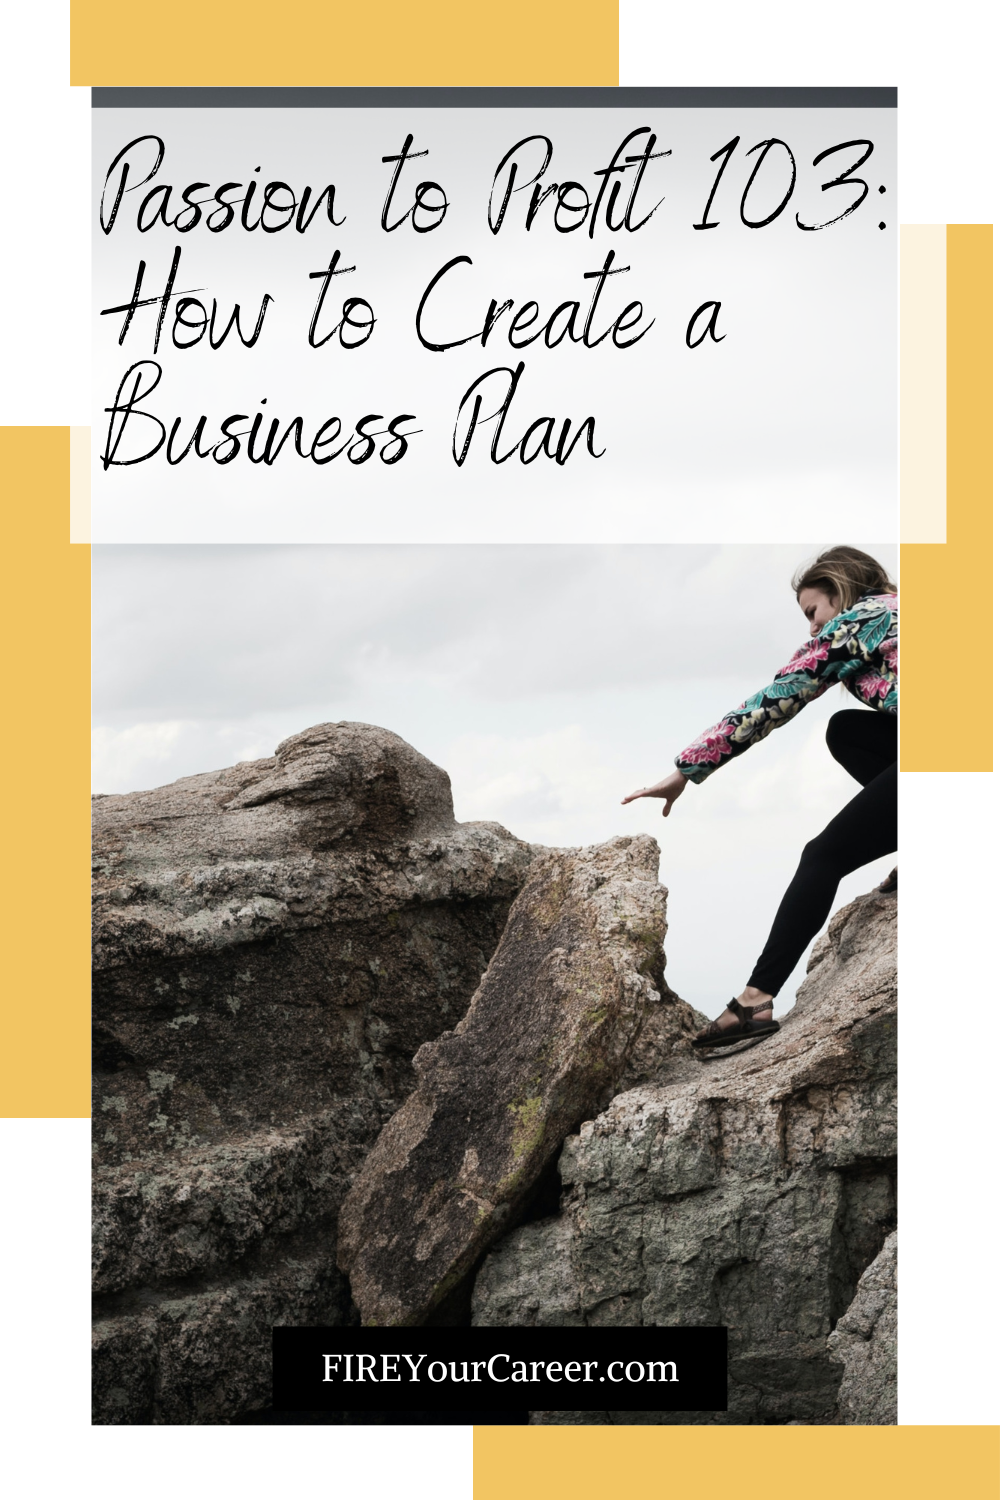 Passion to Profit 103 How to Create a Business Plan